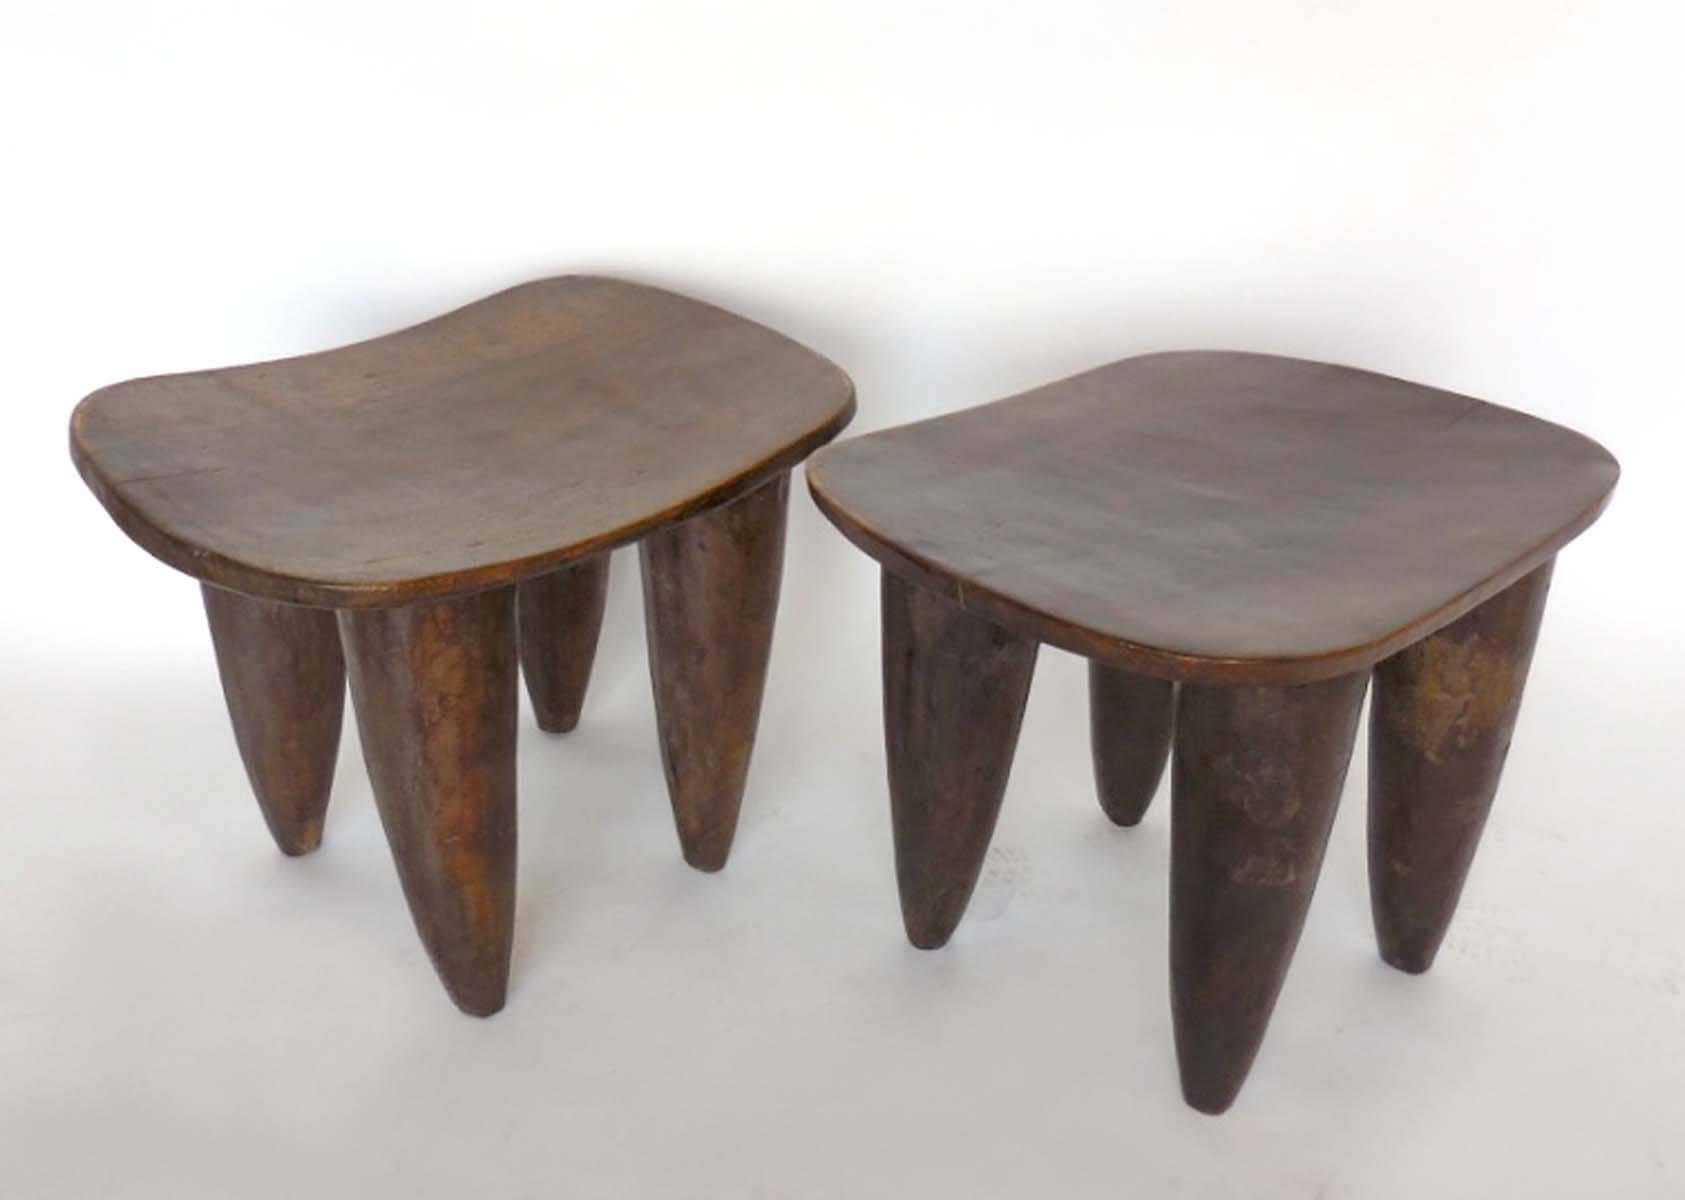 Two hand-carved stools or small side tables from the Senufo tribe of Mali. Each stool is hand-carved out of one piece of wood, early 20th century. Sold separately 
Left measures 25.5 x 23 x 19.5 H
Right measures 26.5 x 22.75 x 20 H.